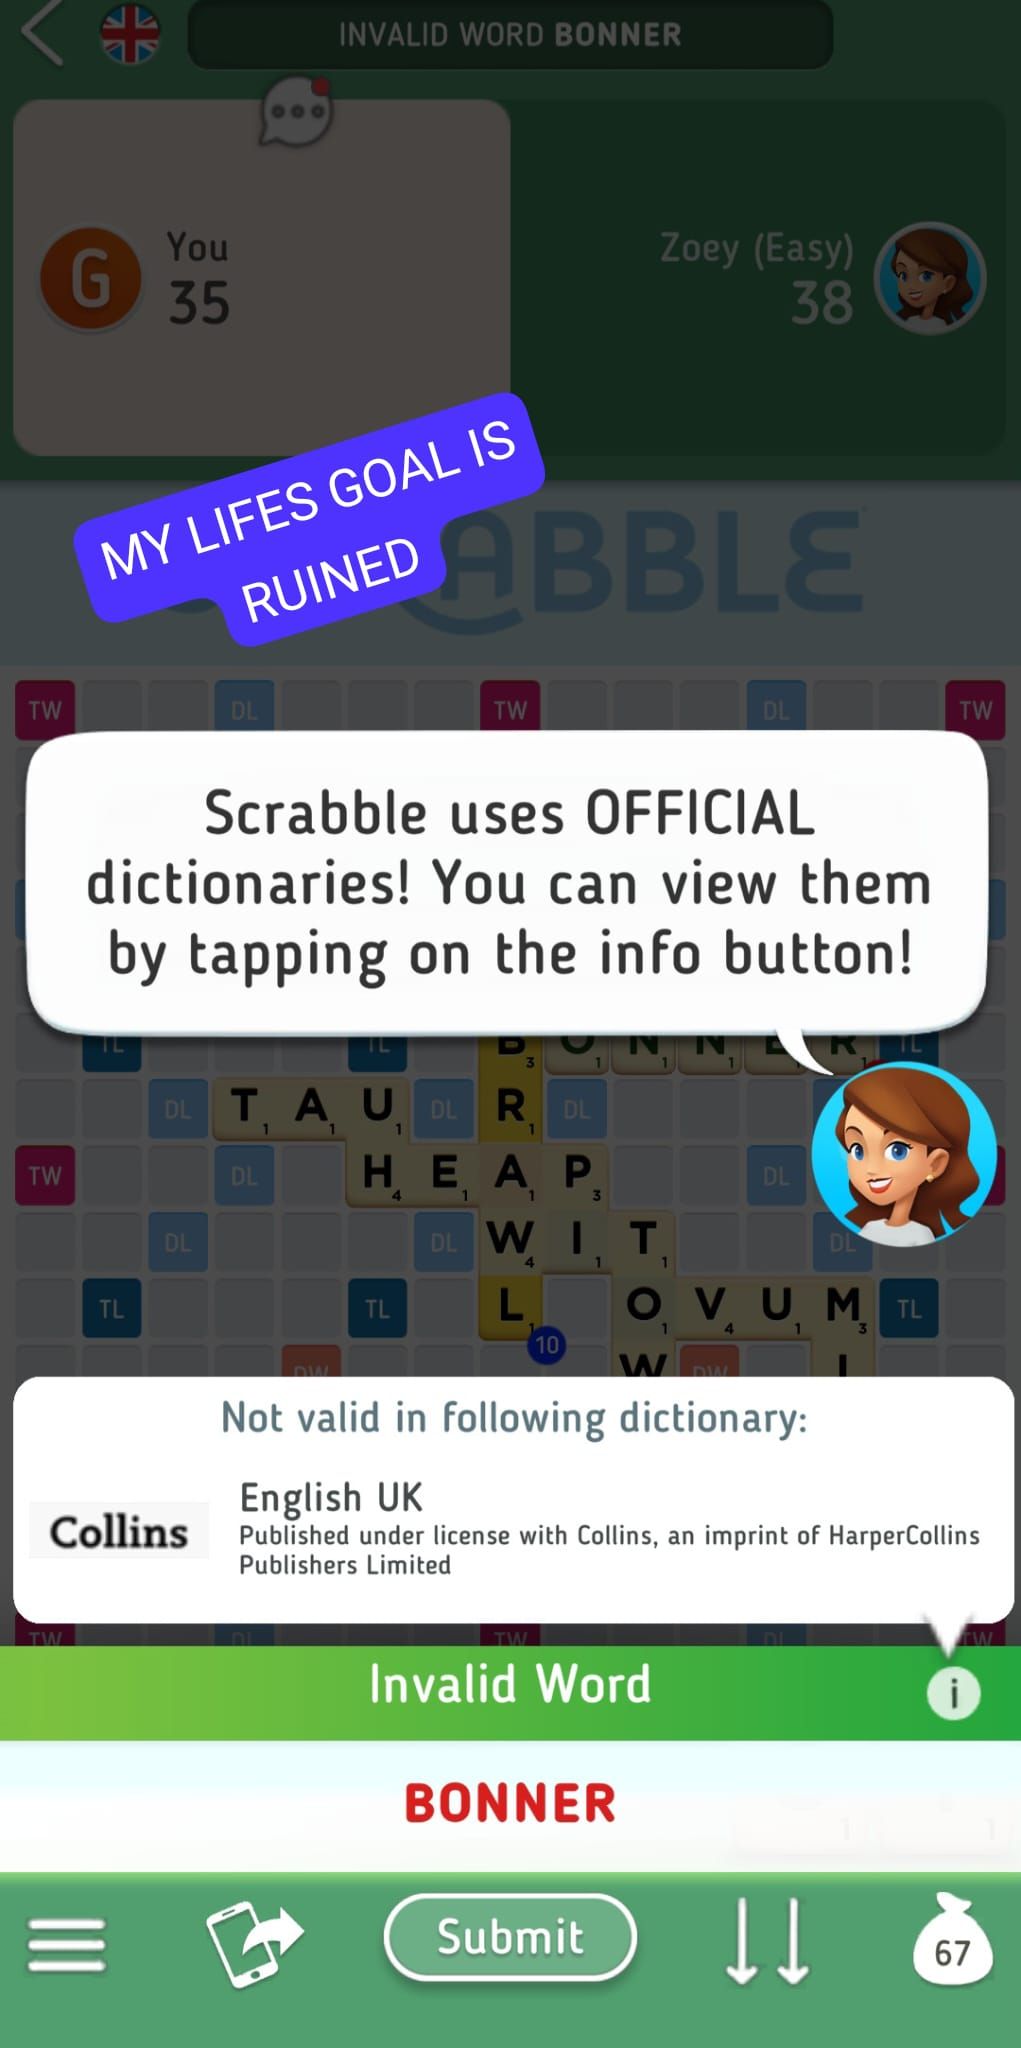 TW
TW
G
TW
You
35
TL
MY LIFES GOAL IS
RUINED
DL
DL
Collins
INVALID WORD BONNER
Scrabble uses OFFICIAL
dictionaries! You can view them
by tapping on the info button!
DL
DL TAU DL RDL
1
1
ABBLE
TW
3
TL
1
Η ΕΑΡ
4
1
1
DL WIT
L
3
10
Zoey (Easy)
38
1
O, V U, M. TL
1
4
3
WDW
Not valid in following dictionary:
Invalid Word
DL
BONNER
Submit
DL
English UK
Published under license with Collins, an imprint of HarperCollins
Publishers Limited
DL
↓↓
TW
i
67